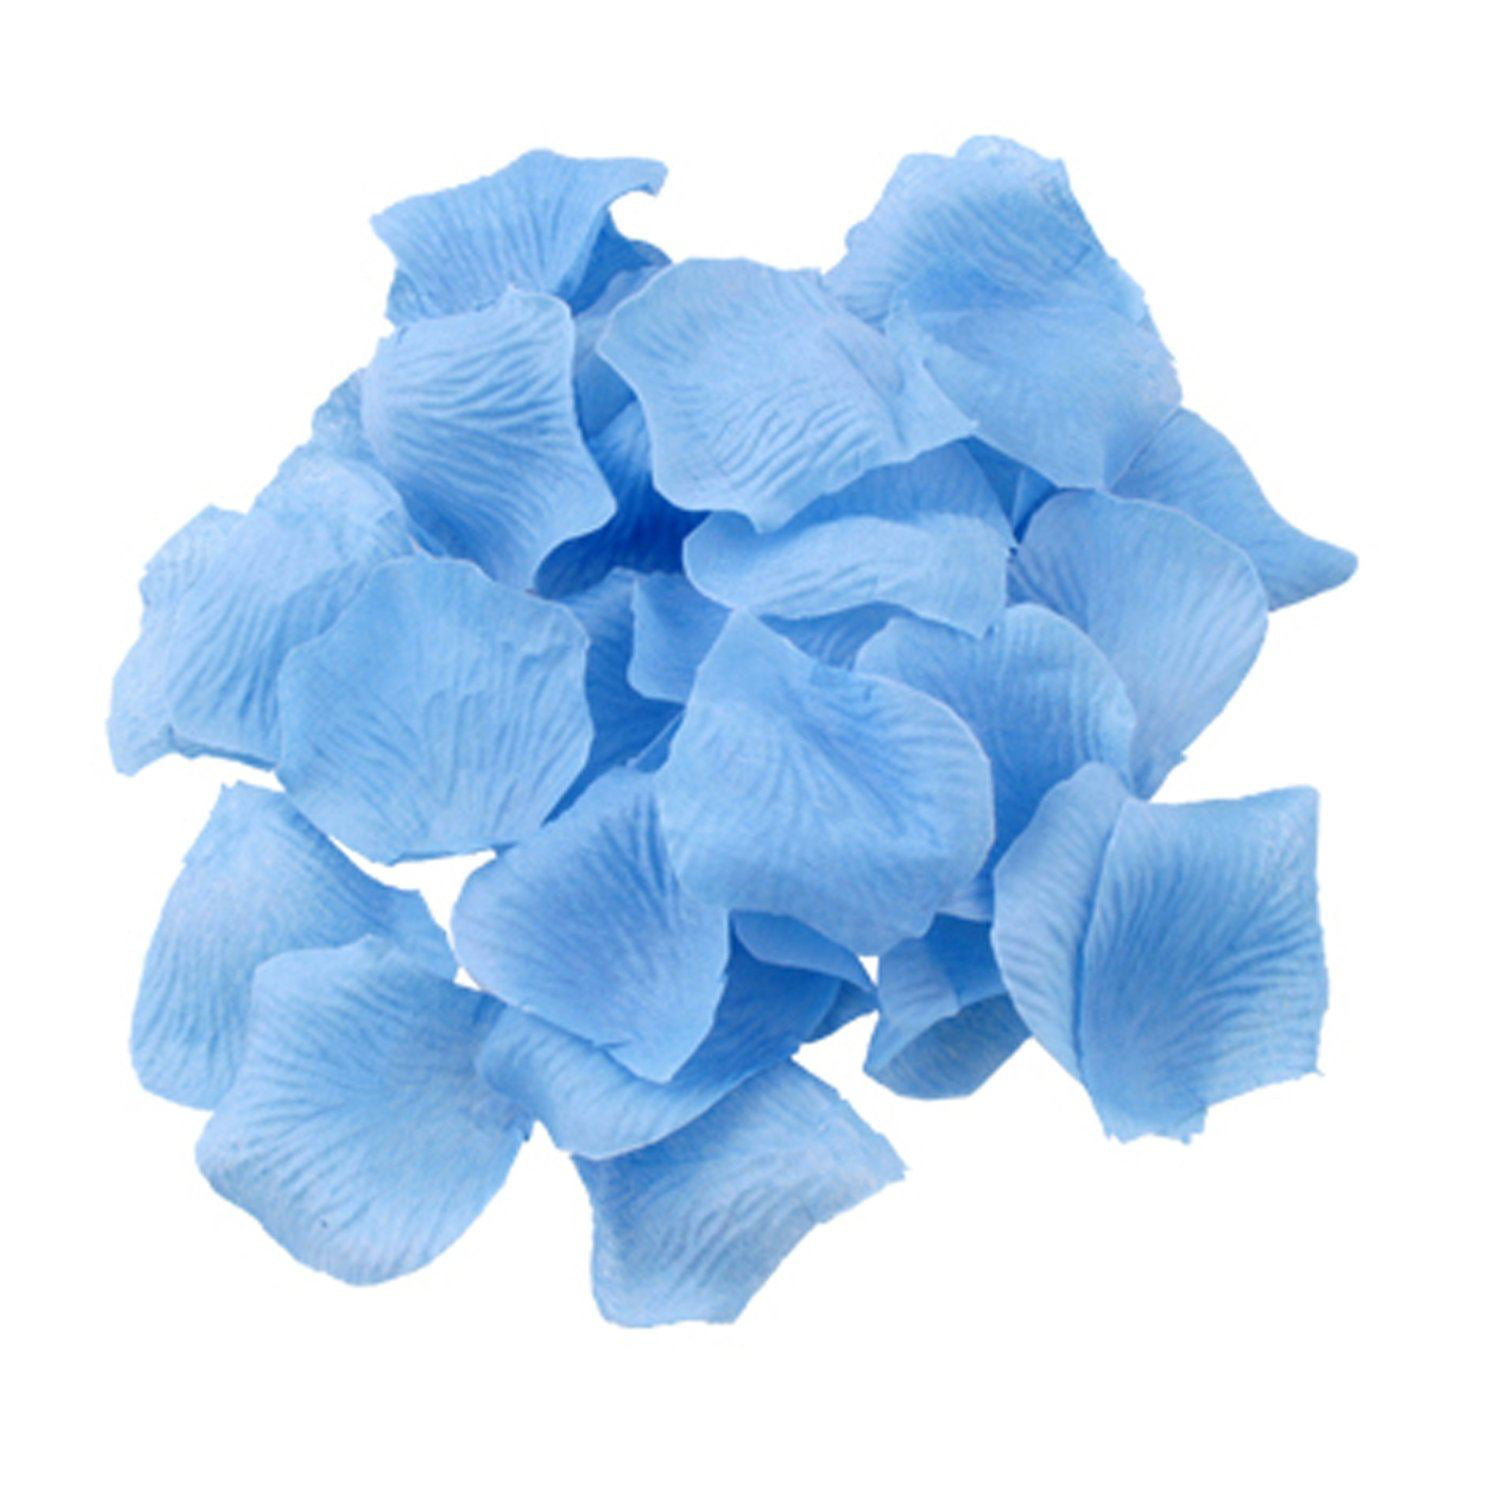 BABY BLUE  SILK ROSE PETALS FLOWER TABLE DECORATION CONFETTI WEDDING PARTY 